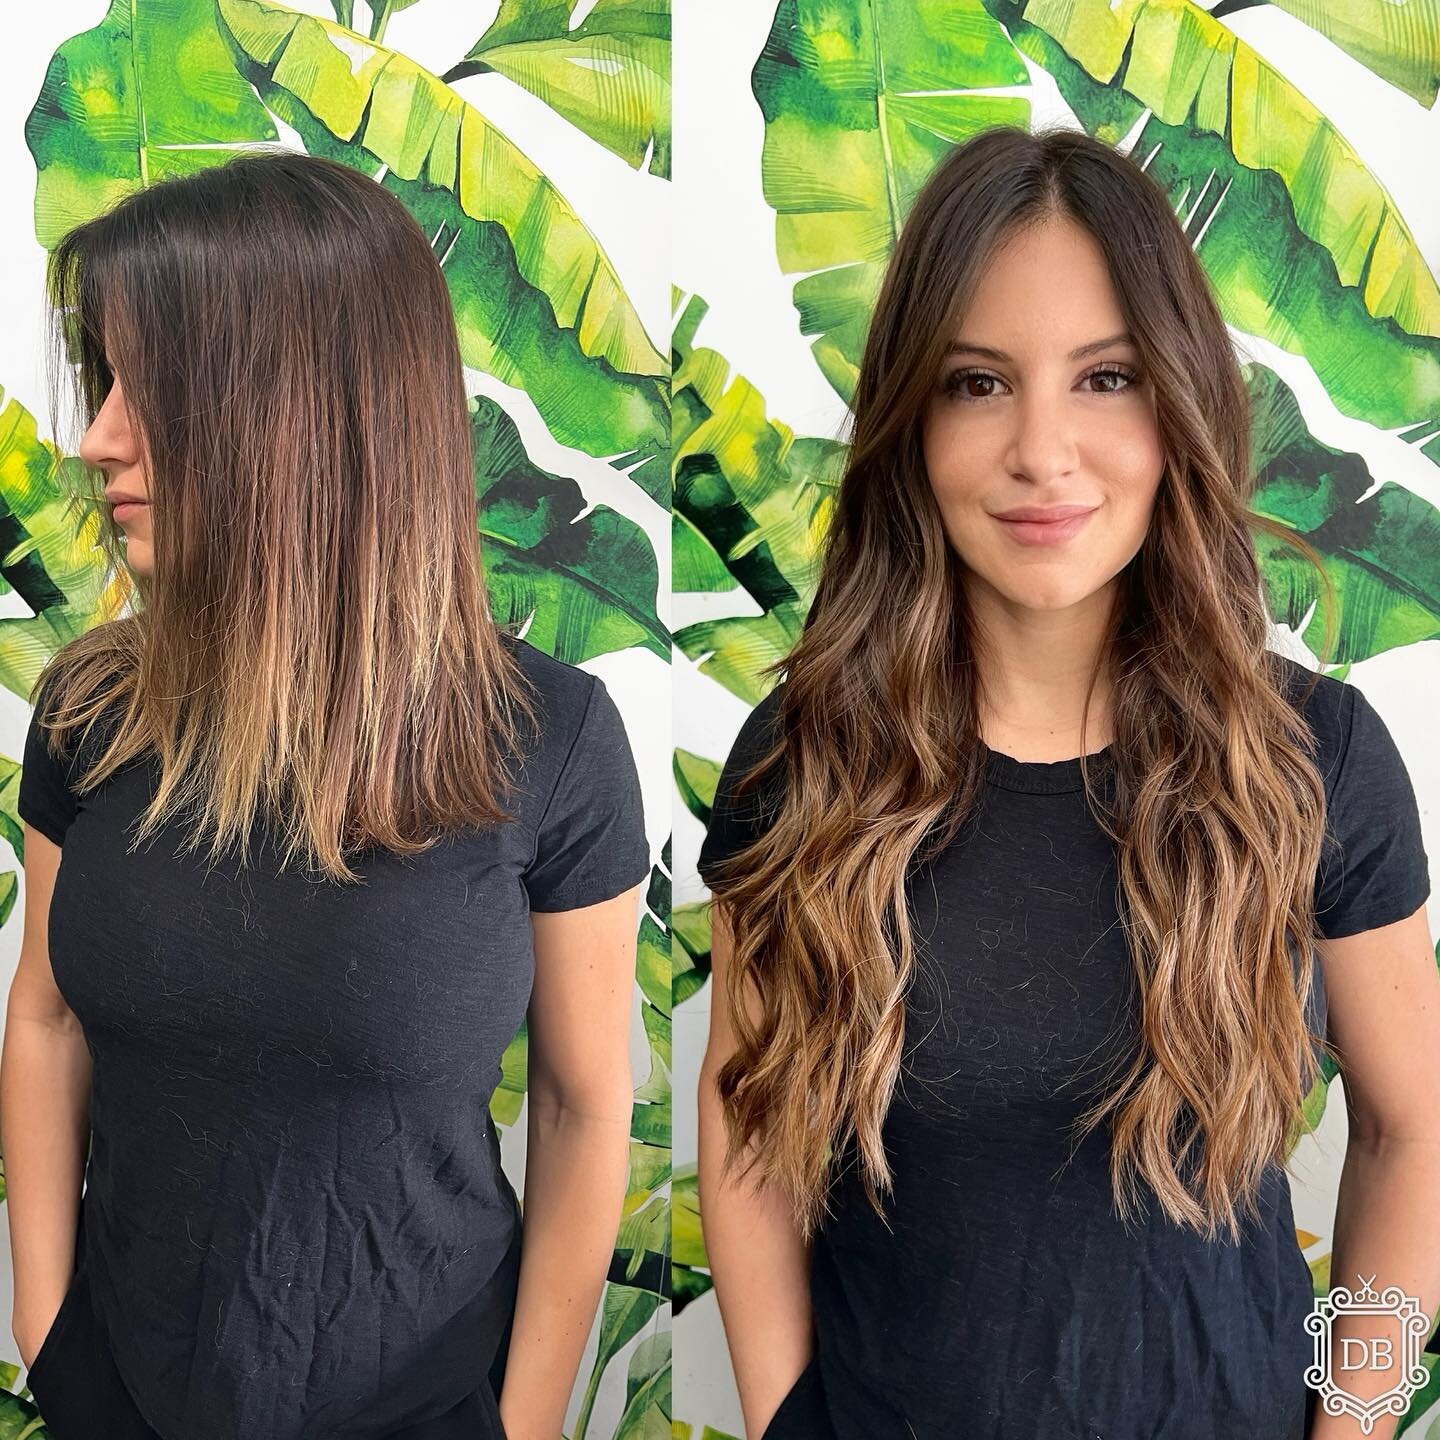 3/4 head of keratin extensions in 18&rdquo; length. Extension install, cut and styling by @dasibstudio #db_fusion 
.
.
.
.
.
.
#fusionextensions #keratinextensions #ktipextensions #santamonicaextensions #santamonicahair #santamonicahairstylist #wests